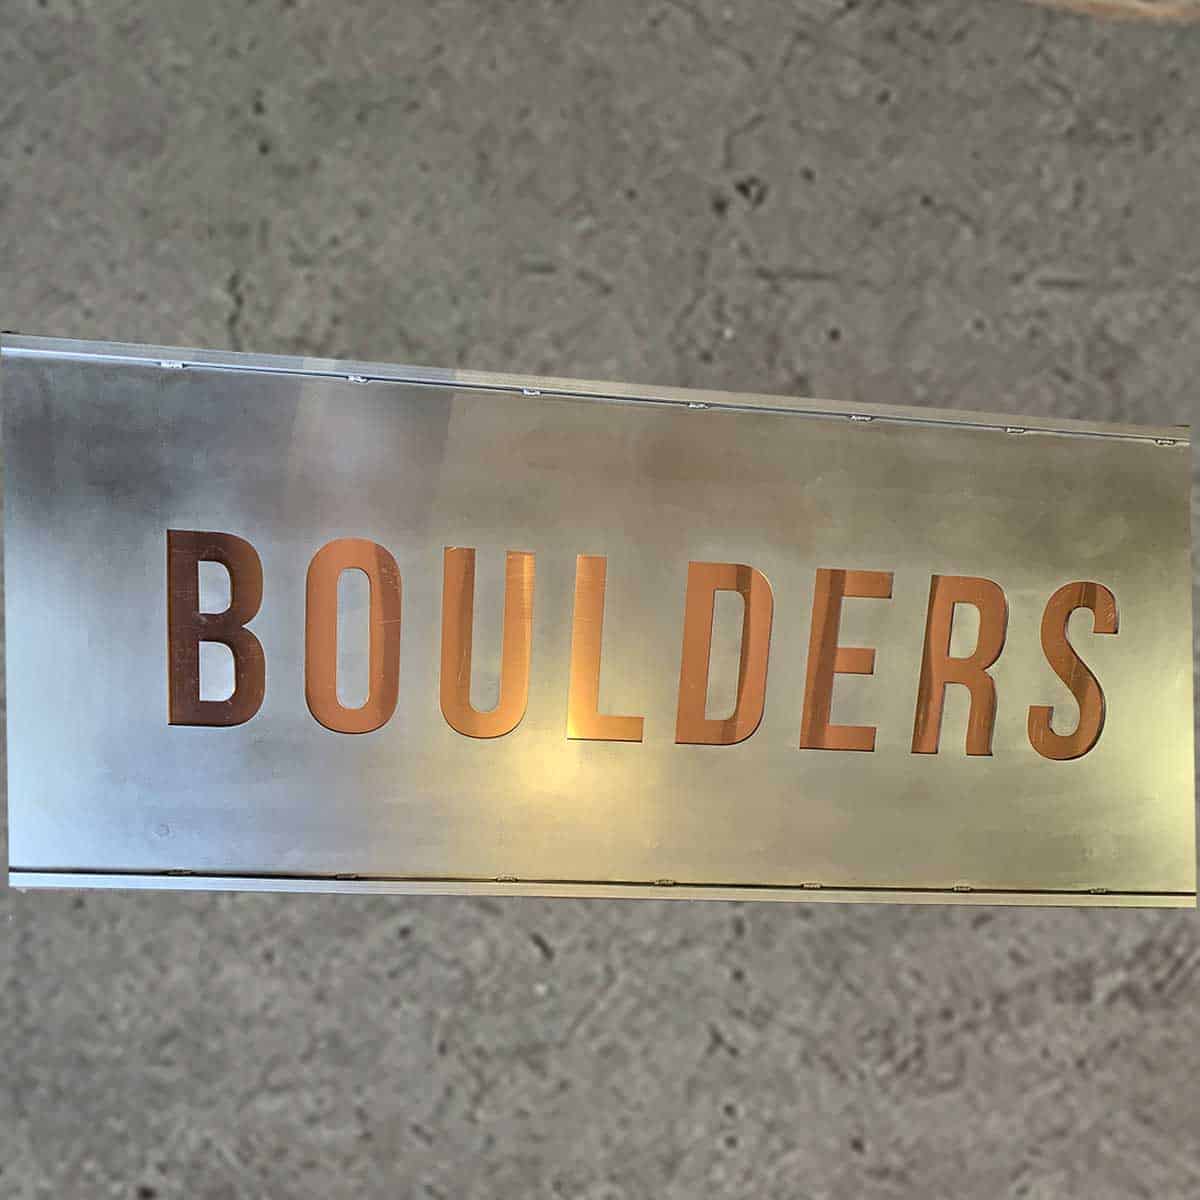 A metallic sign with the word "BOULDERS" cut out in large, capital letters.